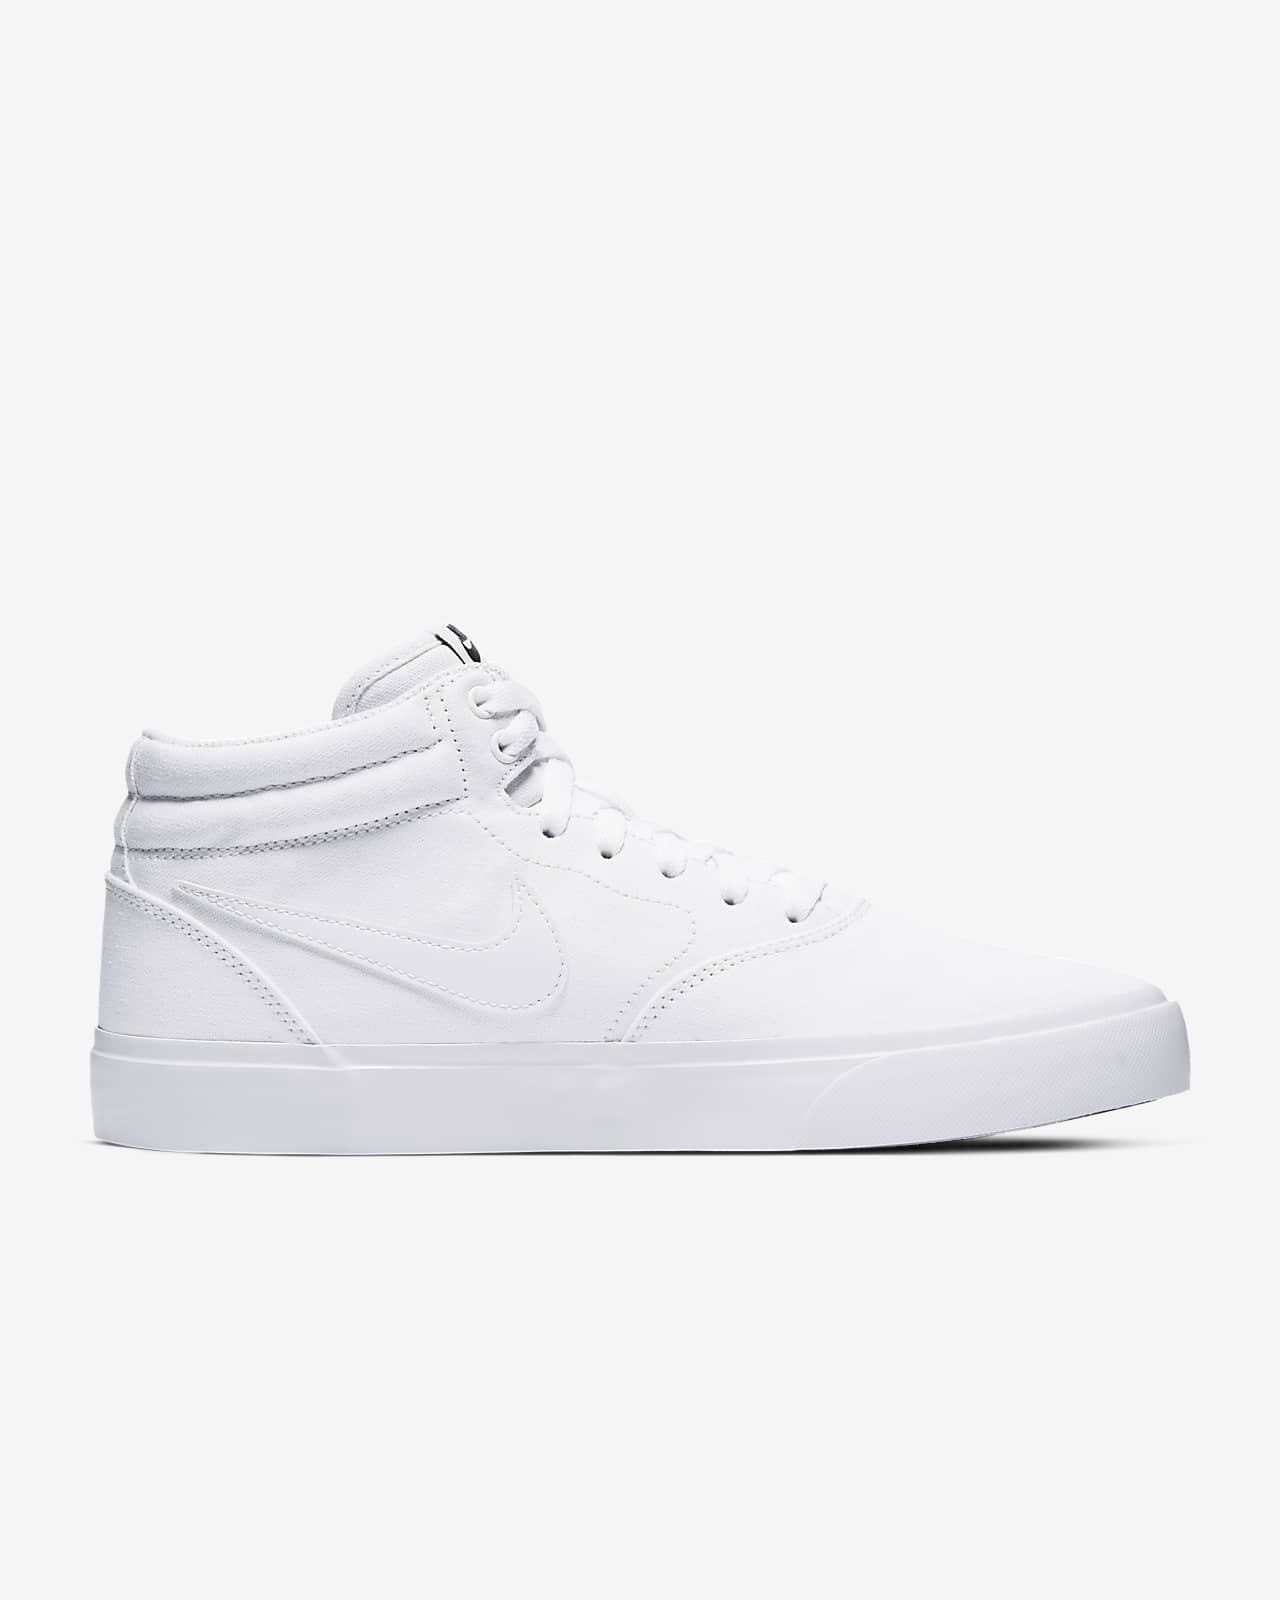 nike charge slr mid canvas mens skate shoes